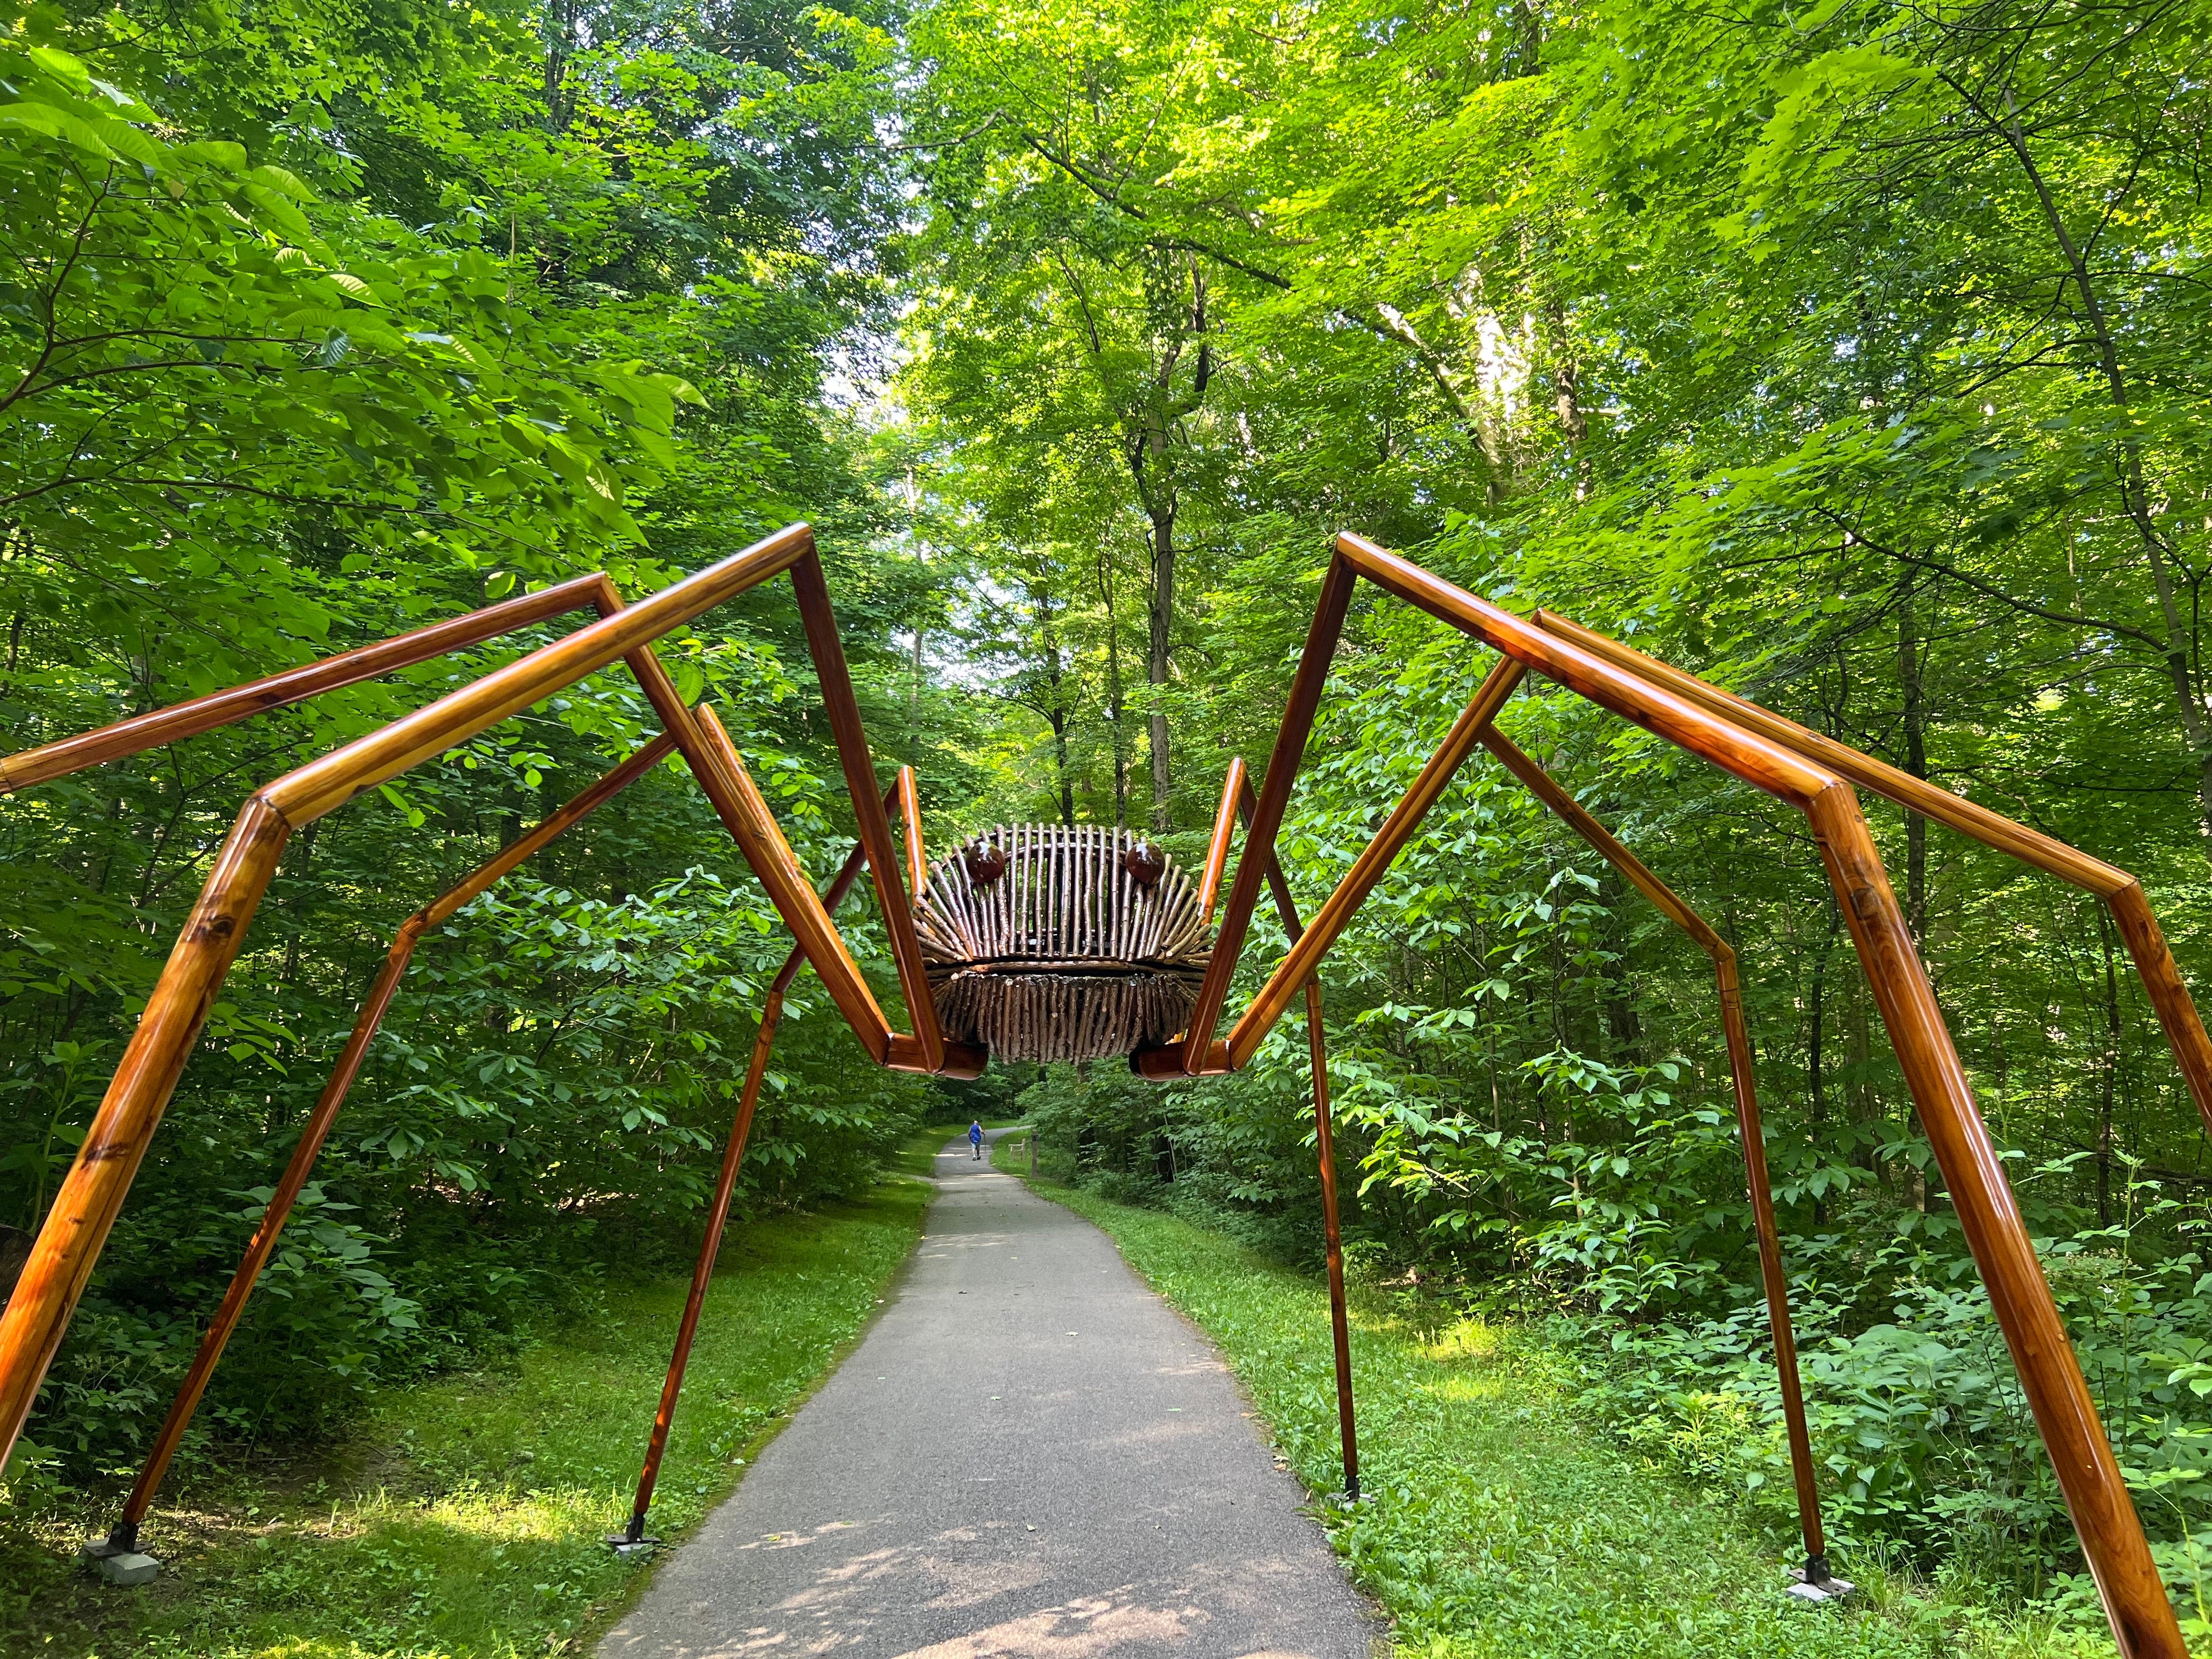 David Rogers’ 'Big Bugs' sculptures to create buzz at The Dawes Arboretum